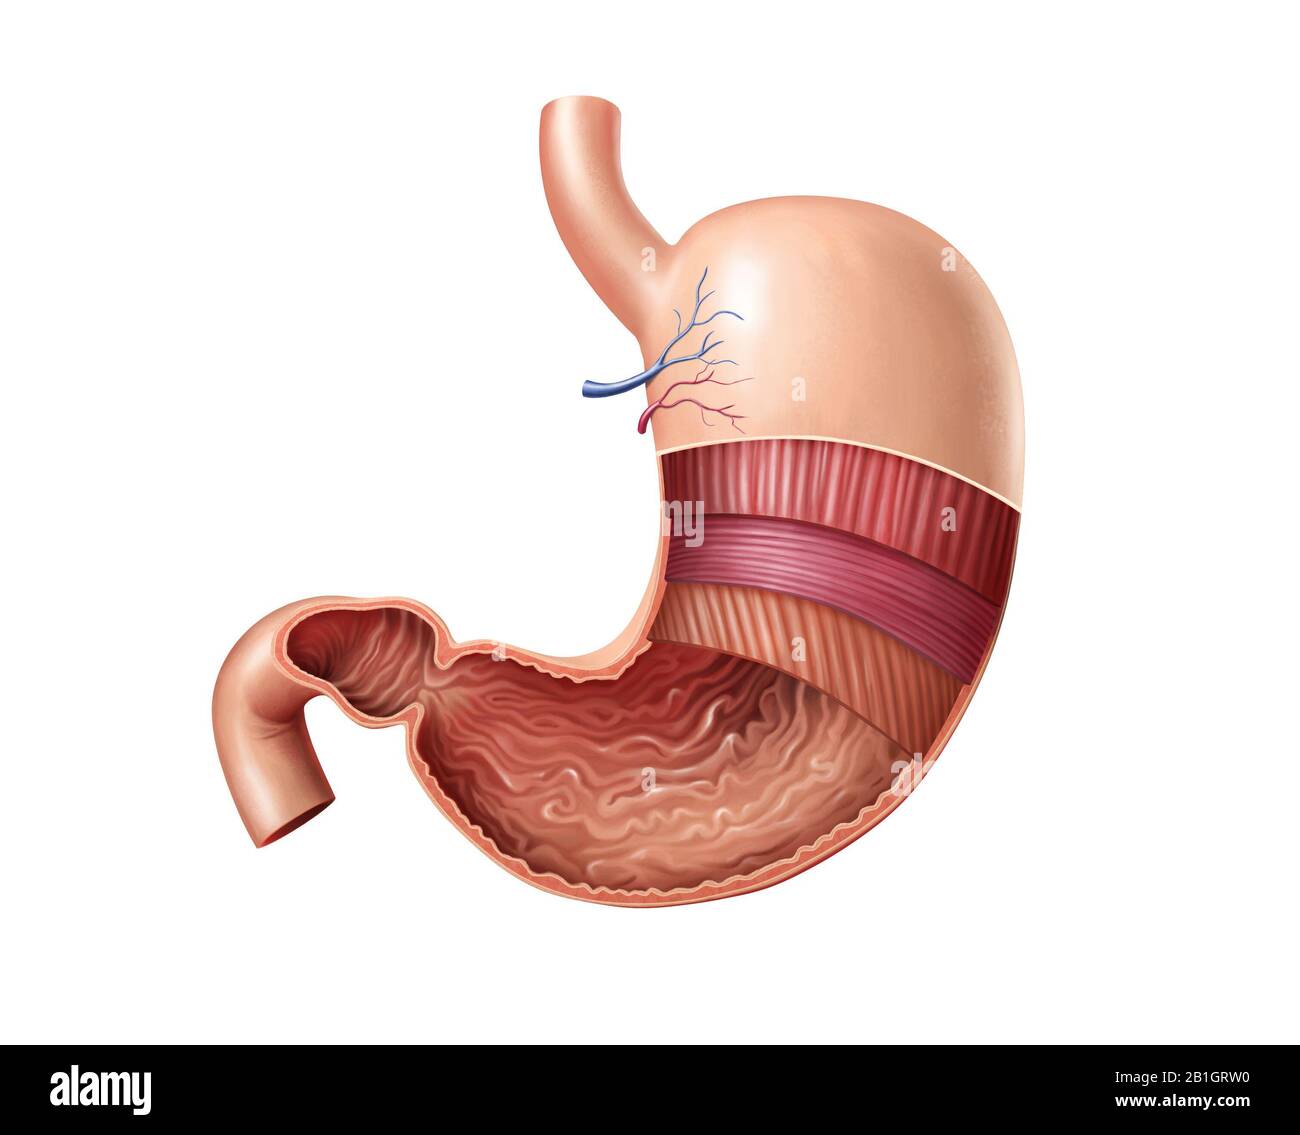 Cross-section of the human stomach, showing its anatomical features. Digital illustration. Stock Photo